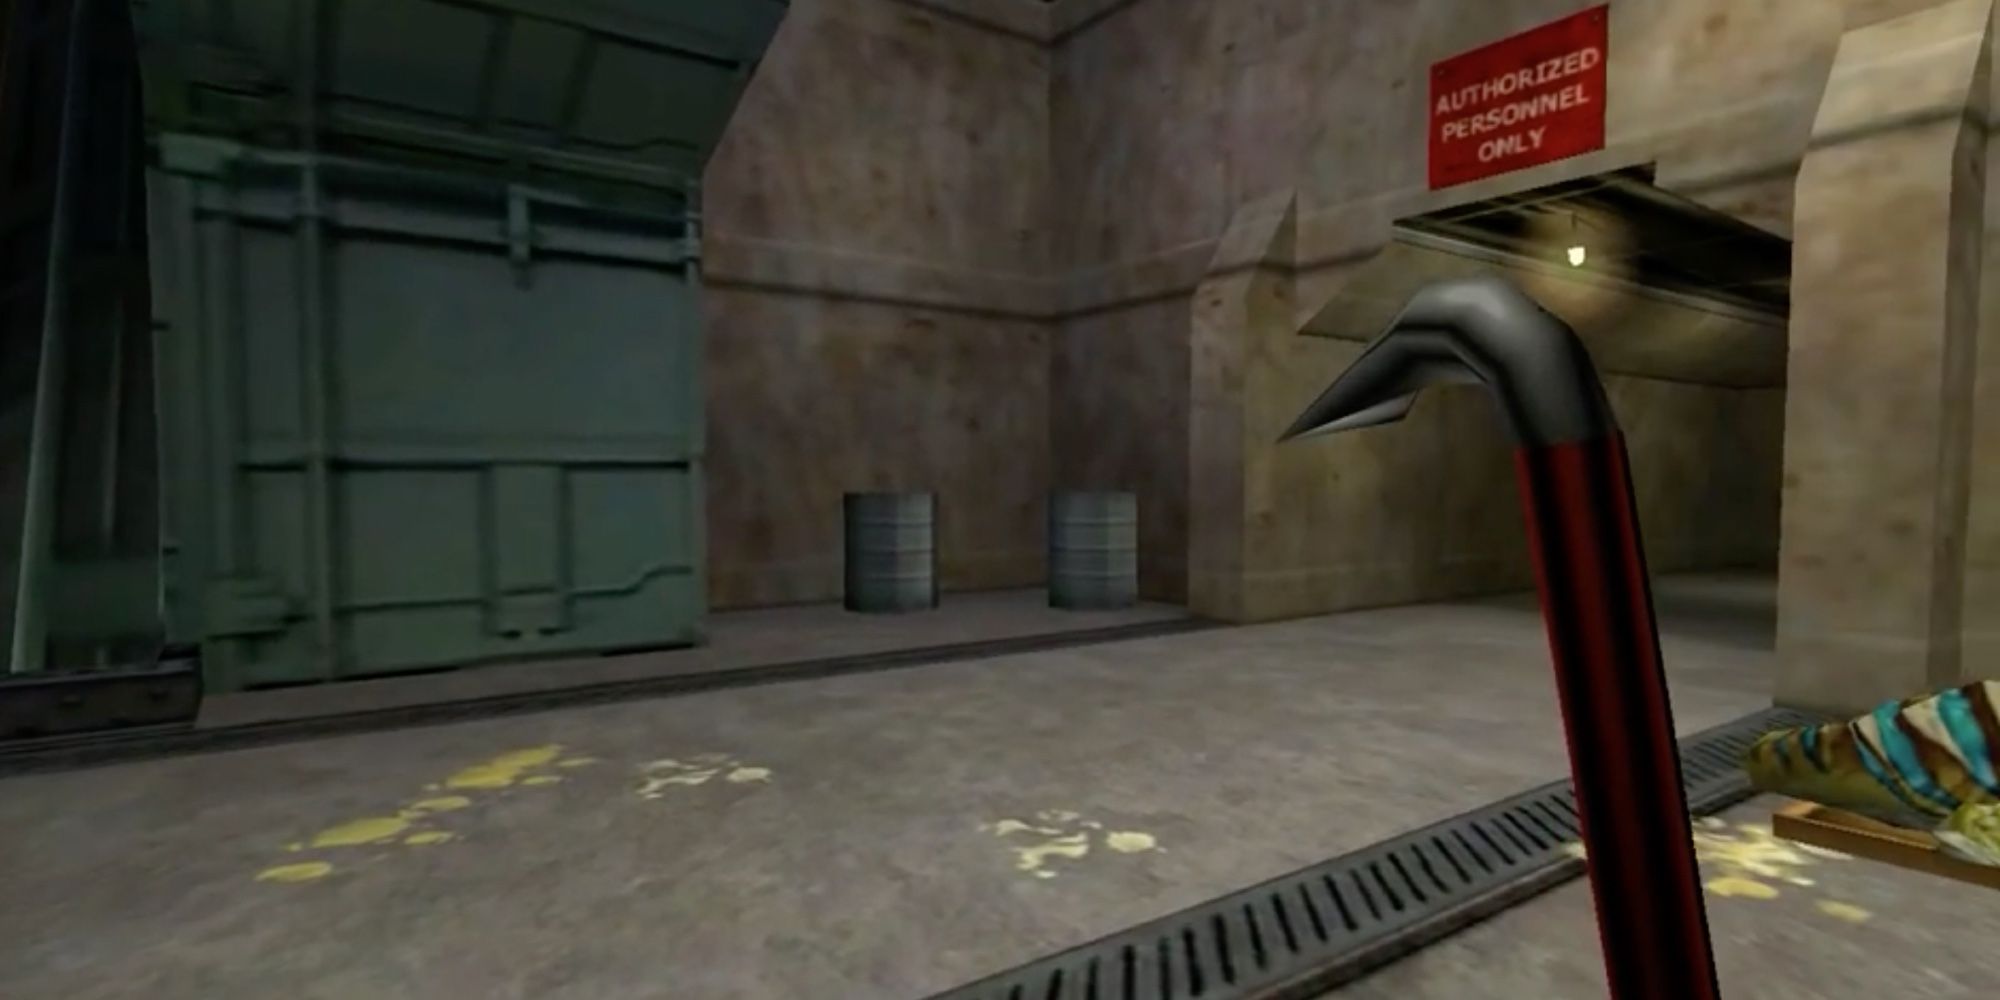 Best Years in Gaming - 1998 - Half-Life - Player explores Black Mesa with a crowbar